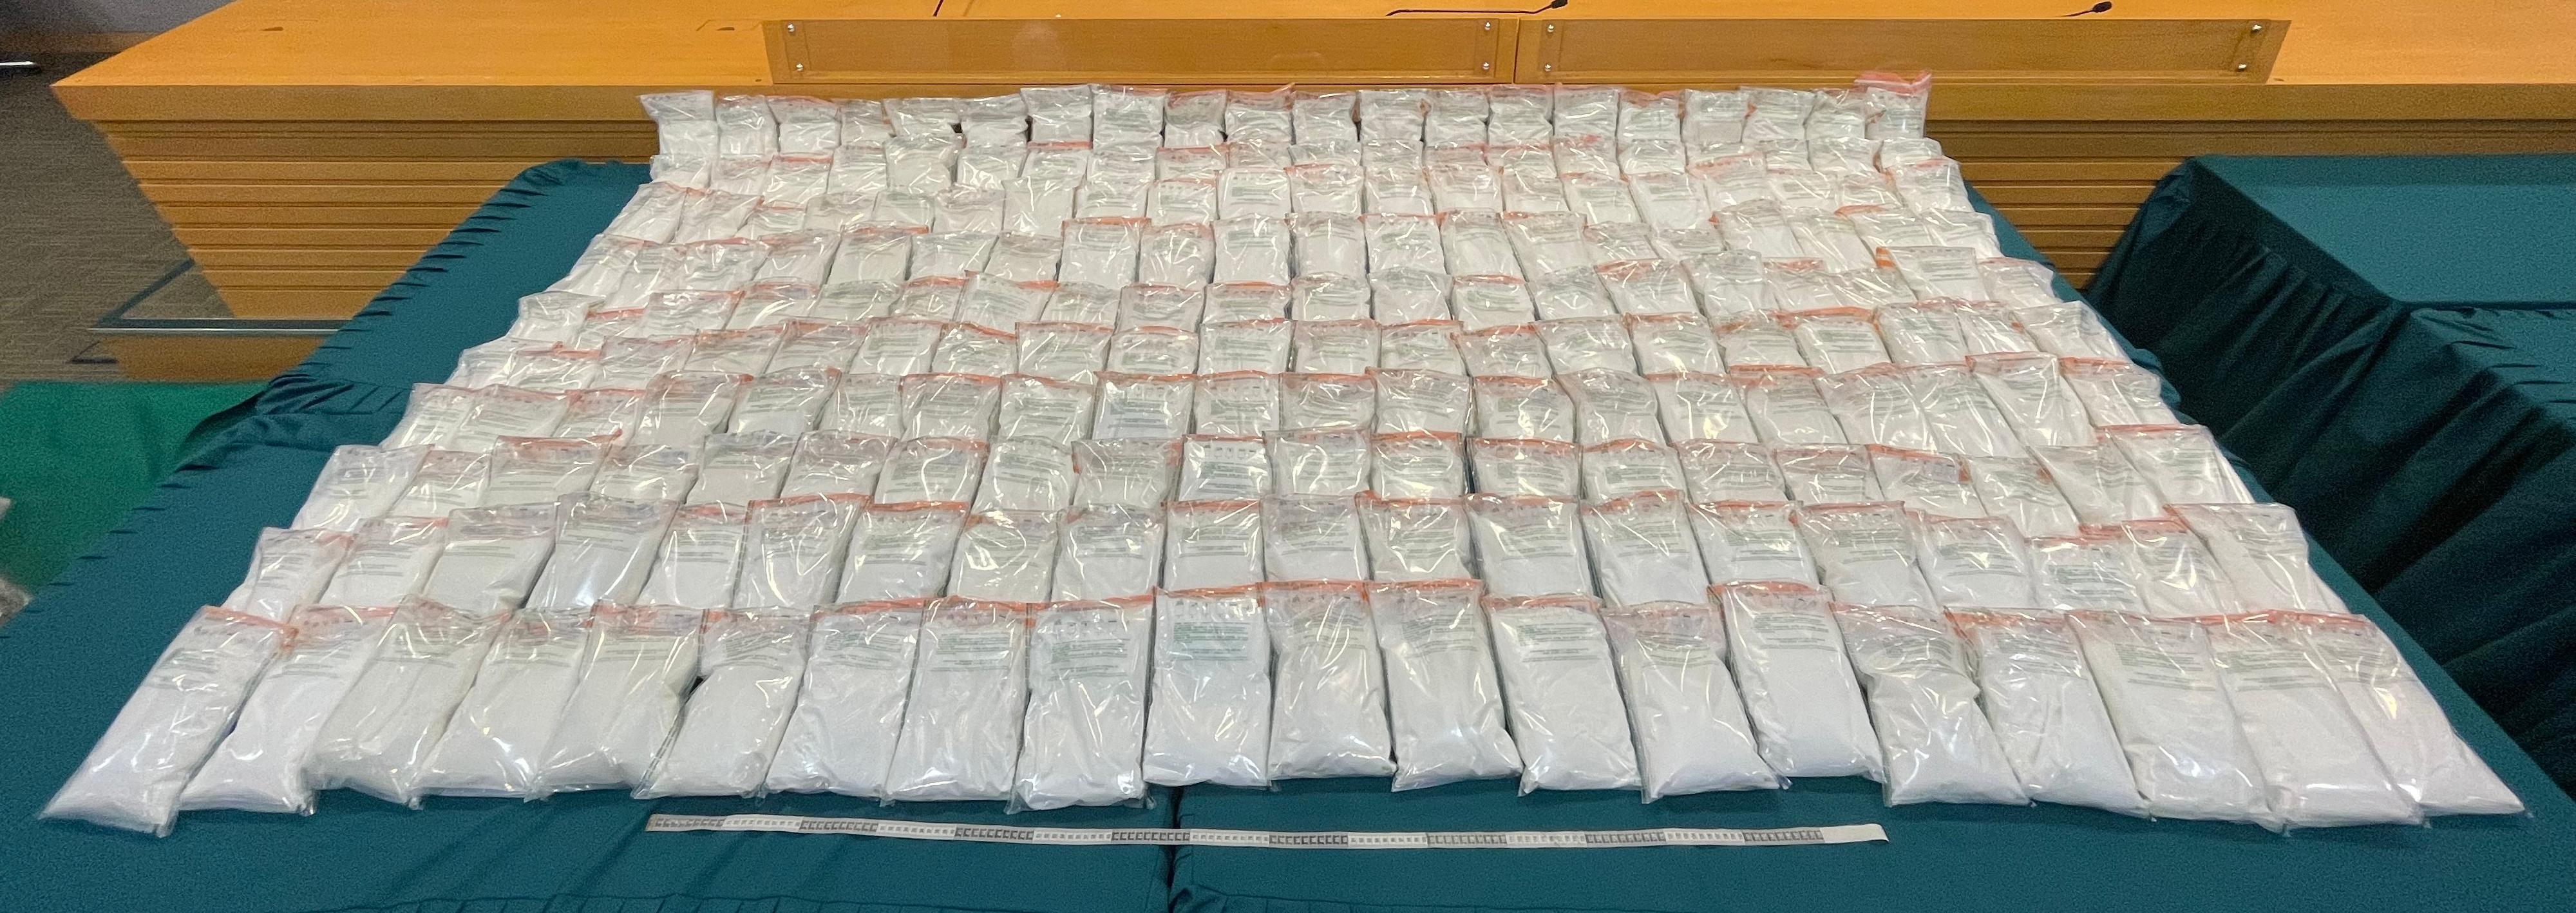 Hong Kong Customs on May 6 and May 16 seized about 200 kilograms of suspected ketamine and about 350 grams of suspected heroin at Hong Kong International Airport and in Sham Shui Po respectively. The total estimated market value was over $86 million. Photo shows the suspected ketamine seized.